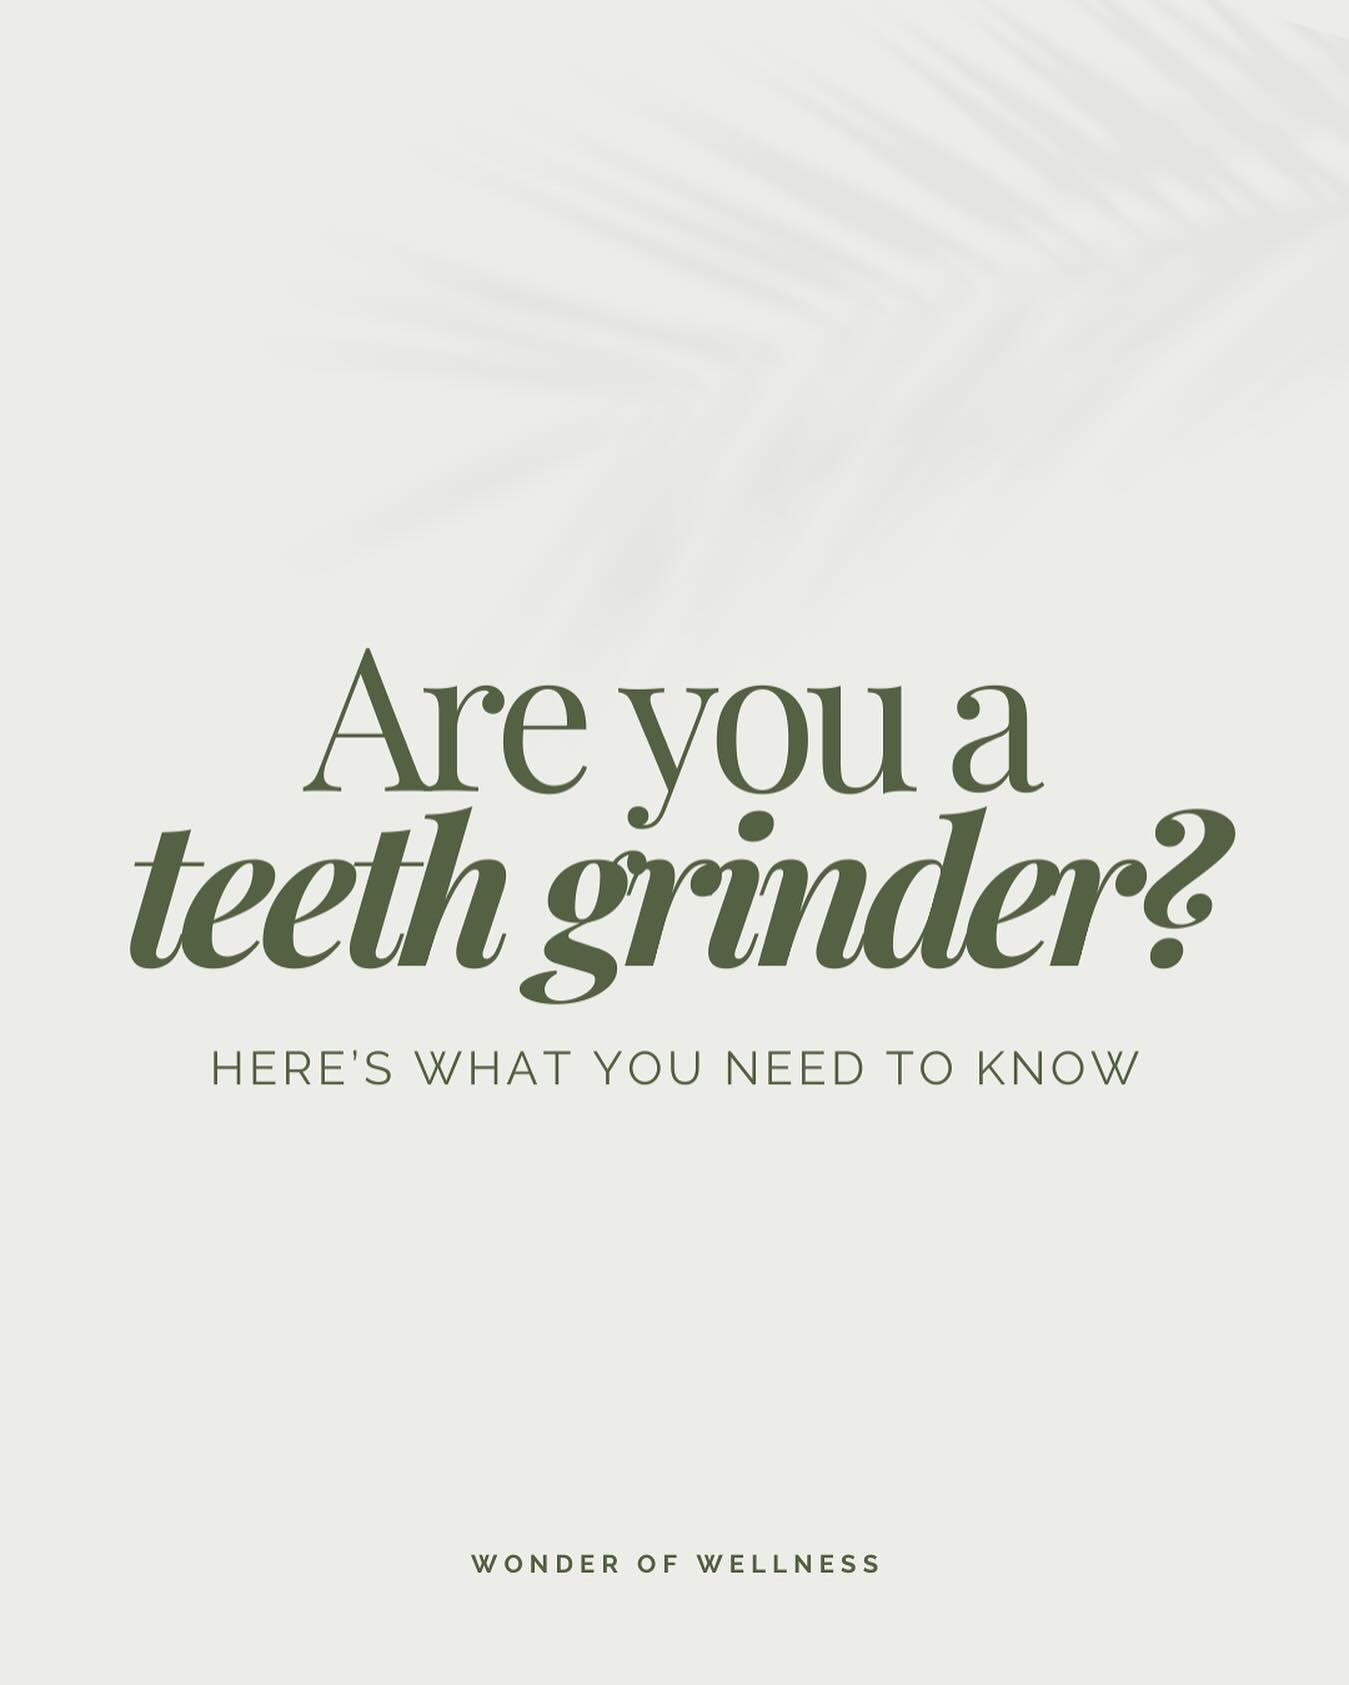 Grinding your teeth can impact your sleep and overall health. 

Did you know this?

Not only does teeth grinding cause potential cracks, fractures and filling losses, you can also wear down your enamel (one of the hardest structures in your body) whi